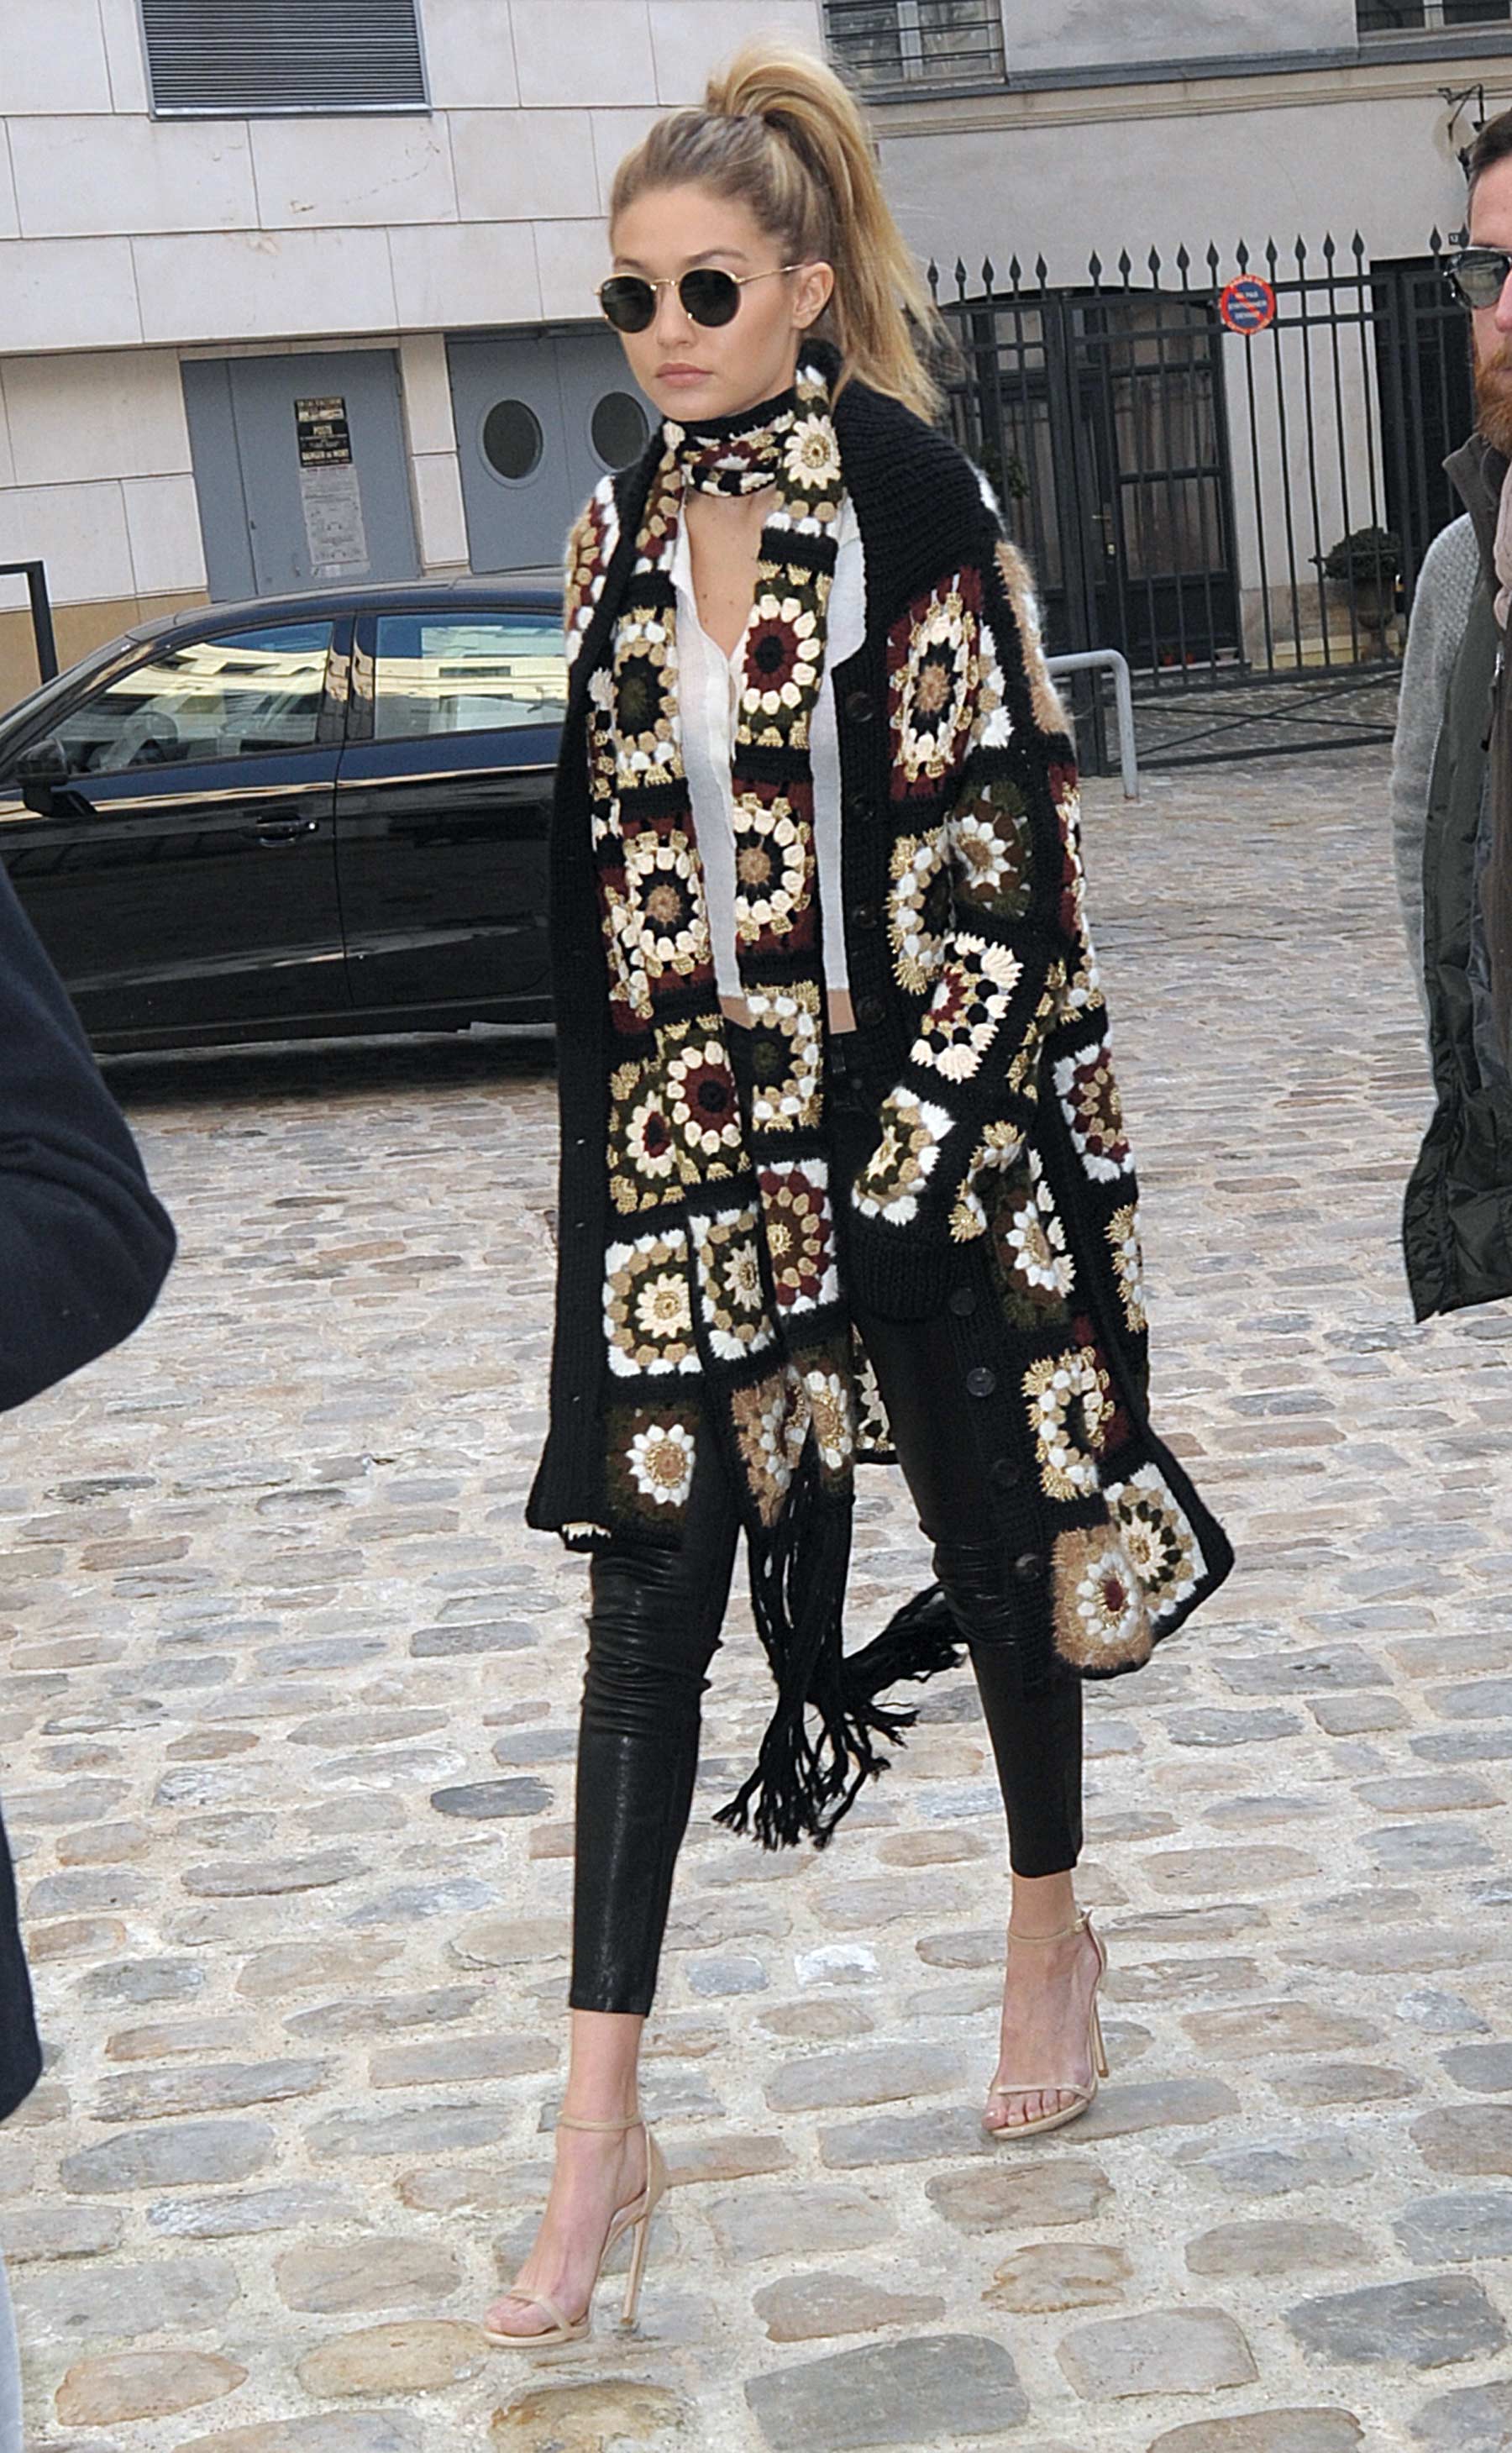 Gigi Hadid leaves her hotel to attend Men’s Fashion Week in Paris